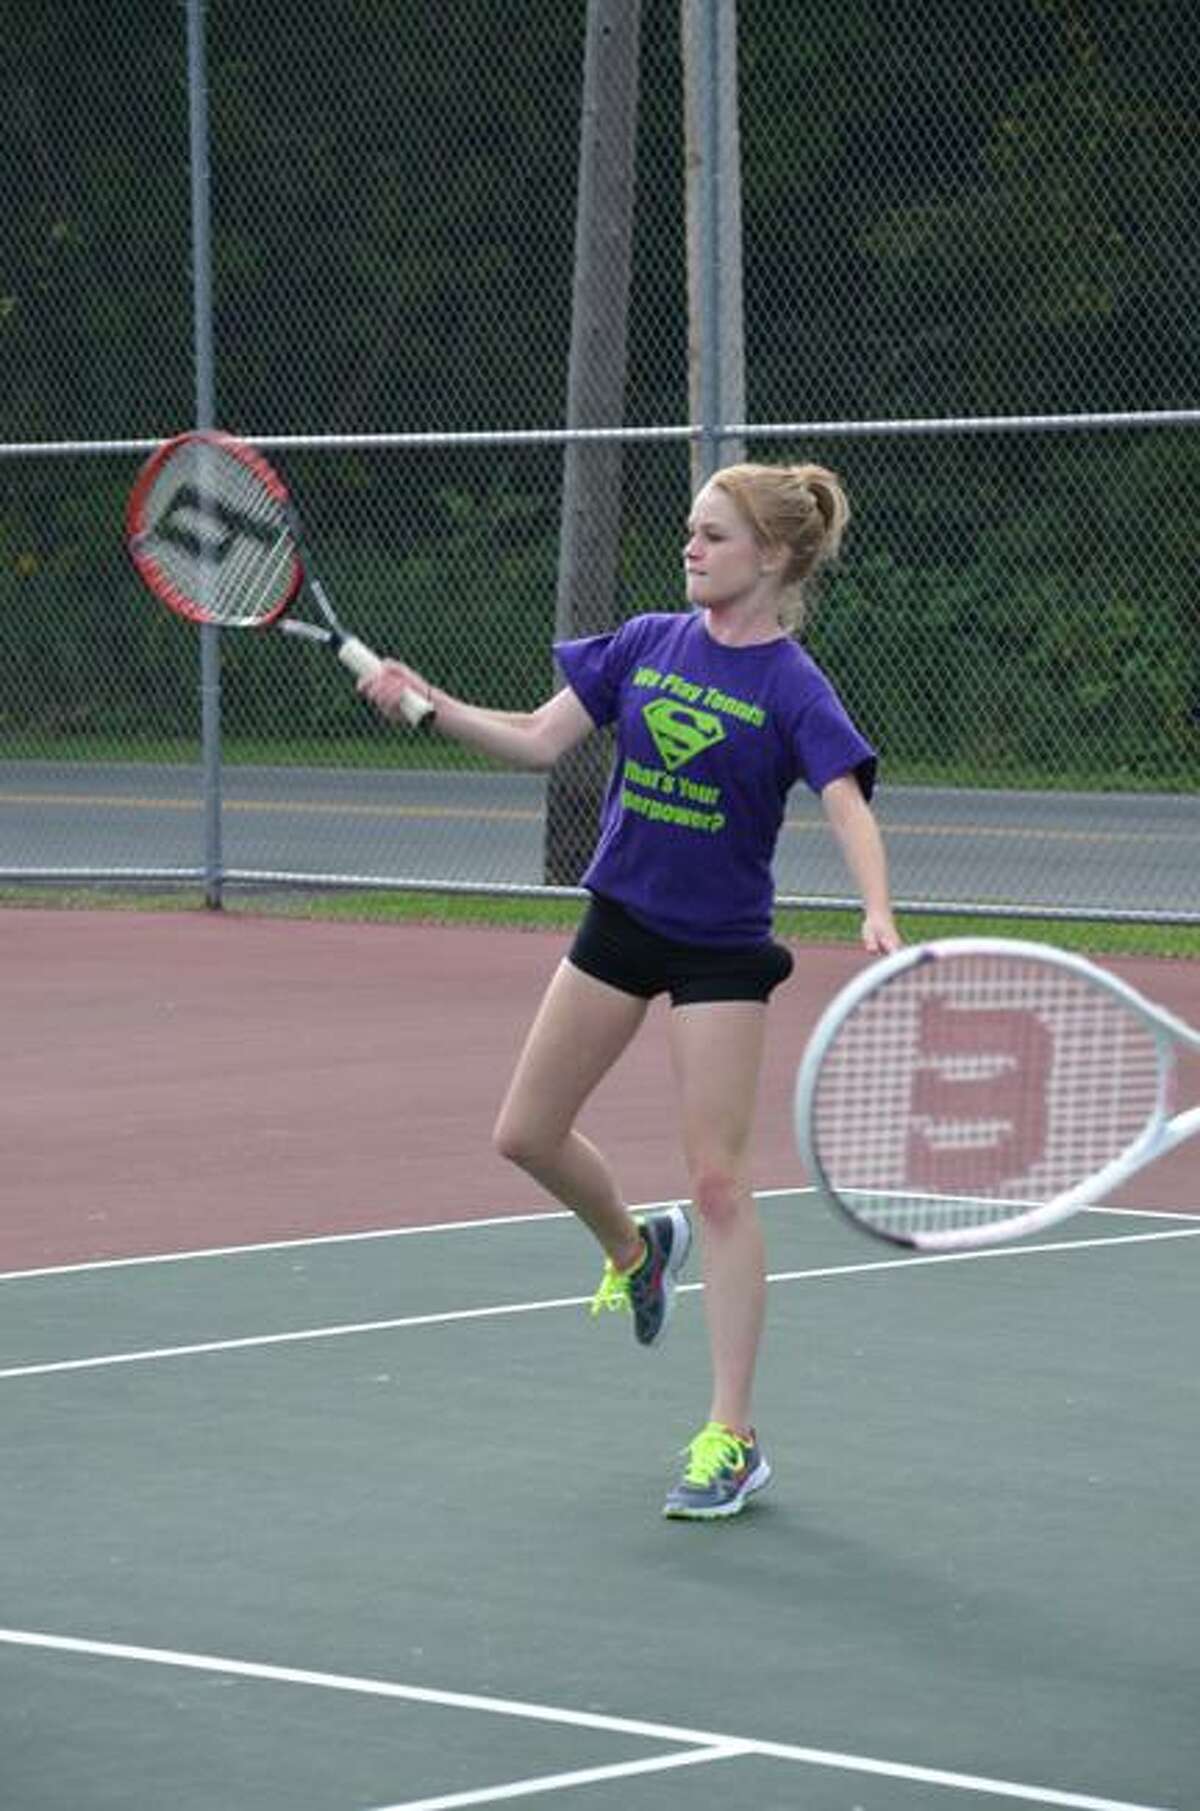 Dispatch Staff Photo by KYLE MENNIG Canastota's Megan Winters hits a tennis ball during practice Monday at the high school.